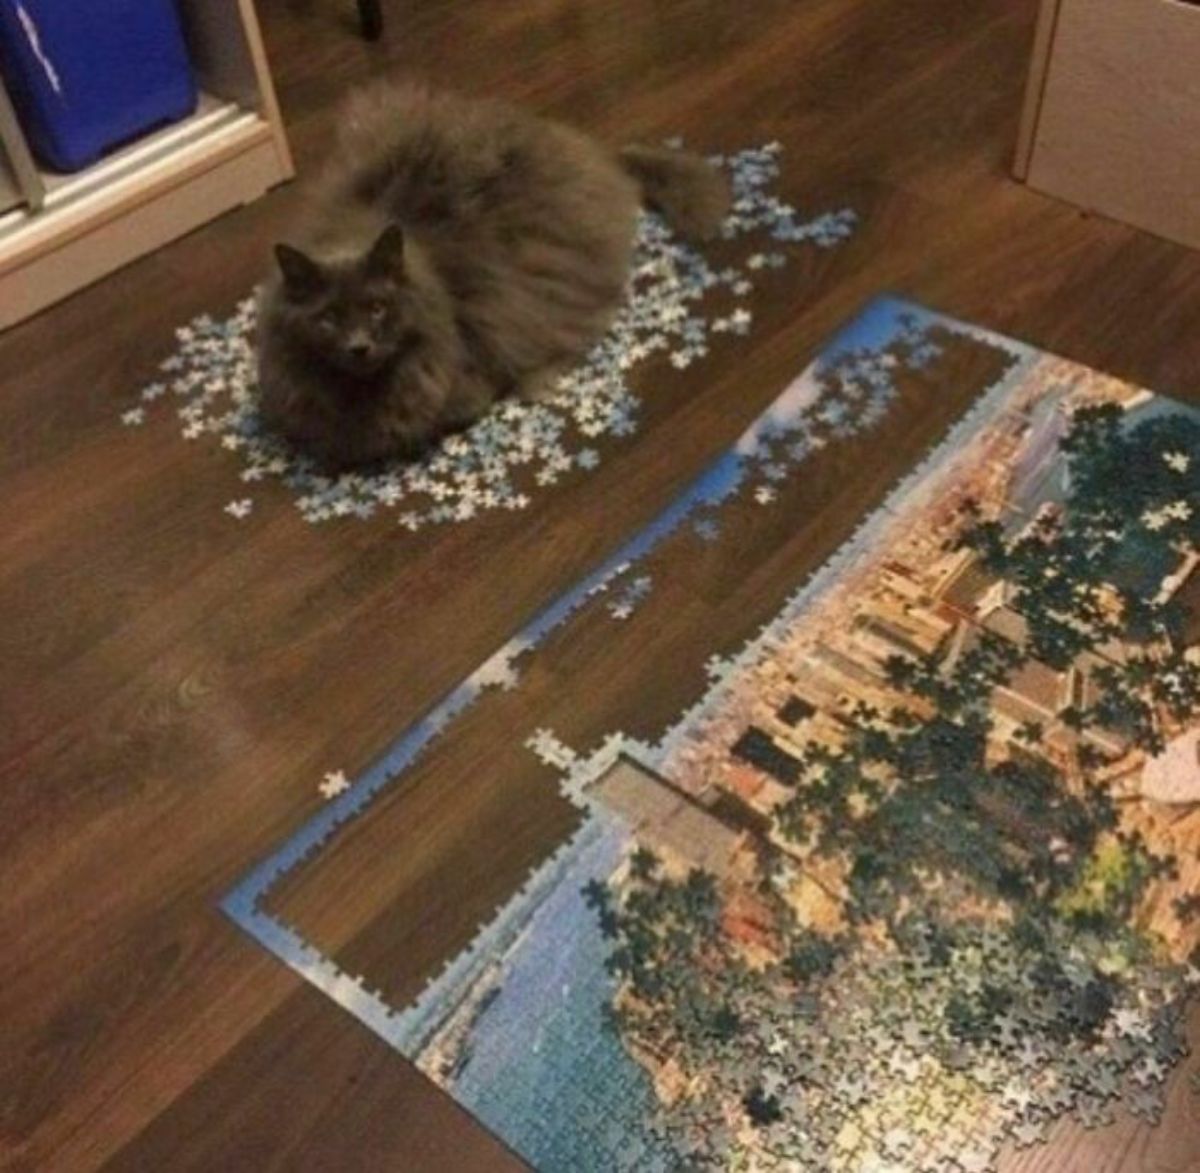 grey fluffy cat sitting on a pile of jigsaw puzzle pieces next to a partially completed jigsaw puzzle